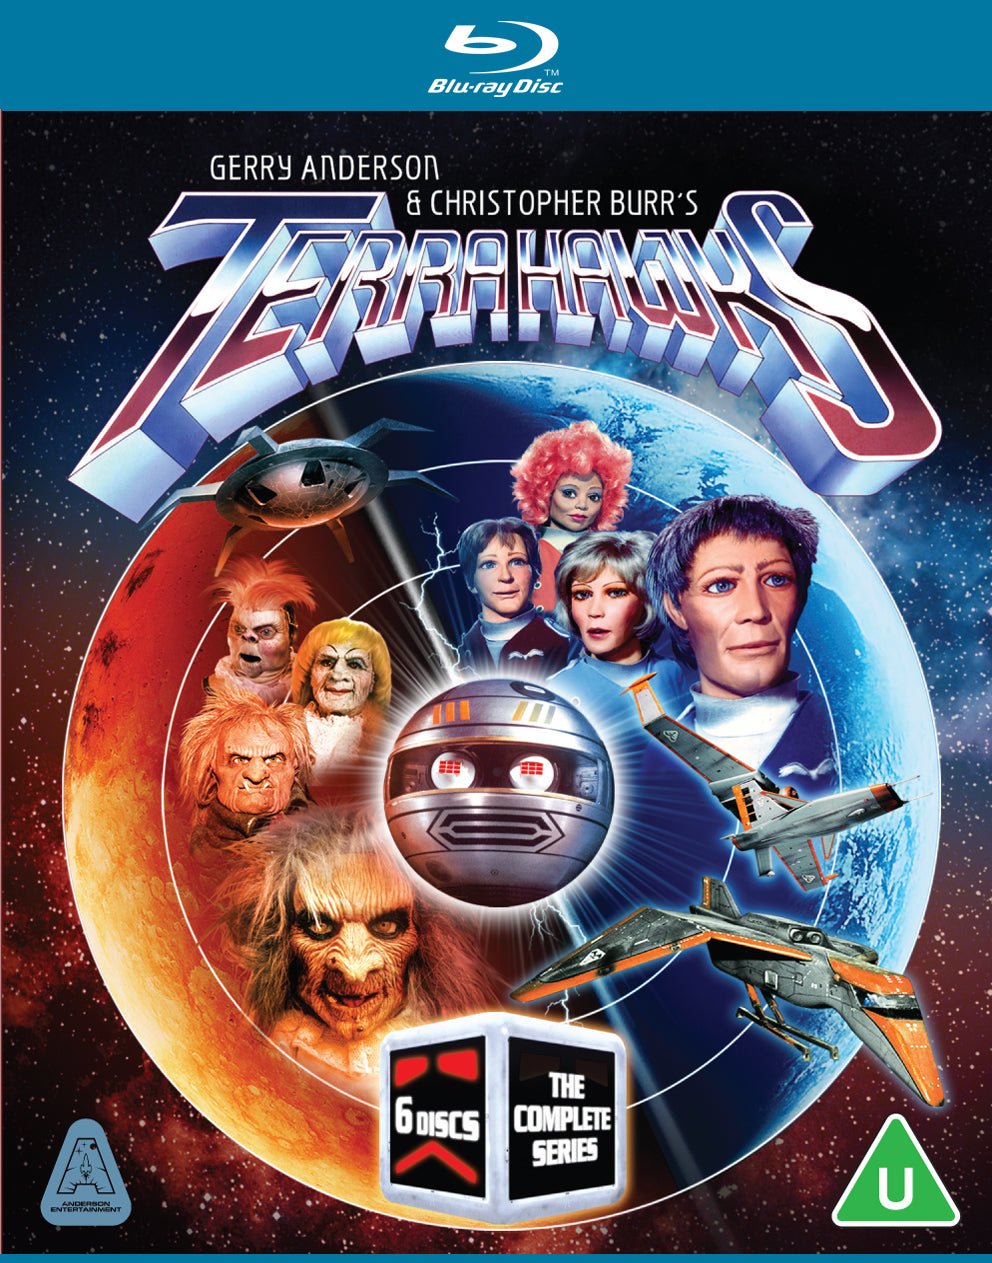 Terrahawks: The Complete Series [Blu-ray] (Region ABC) - The Gerry Anderson Store